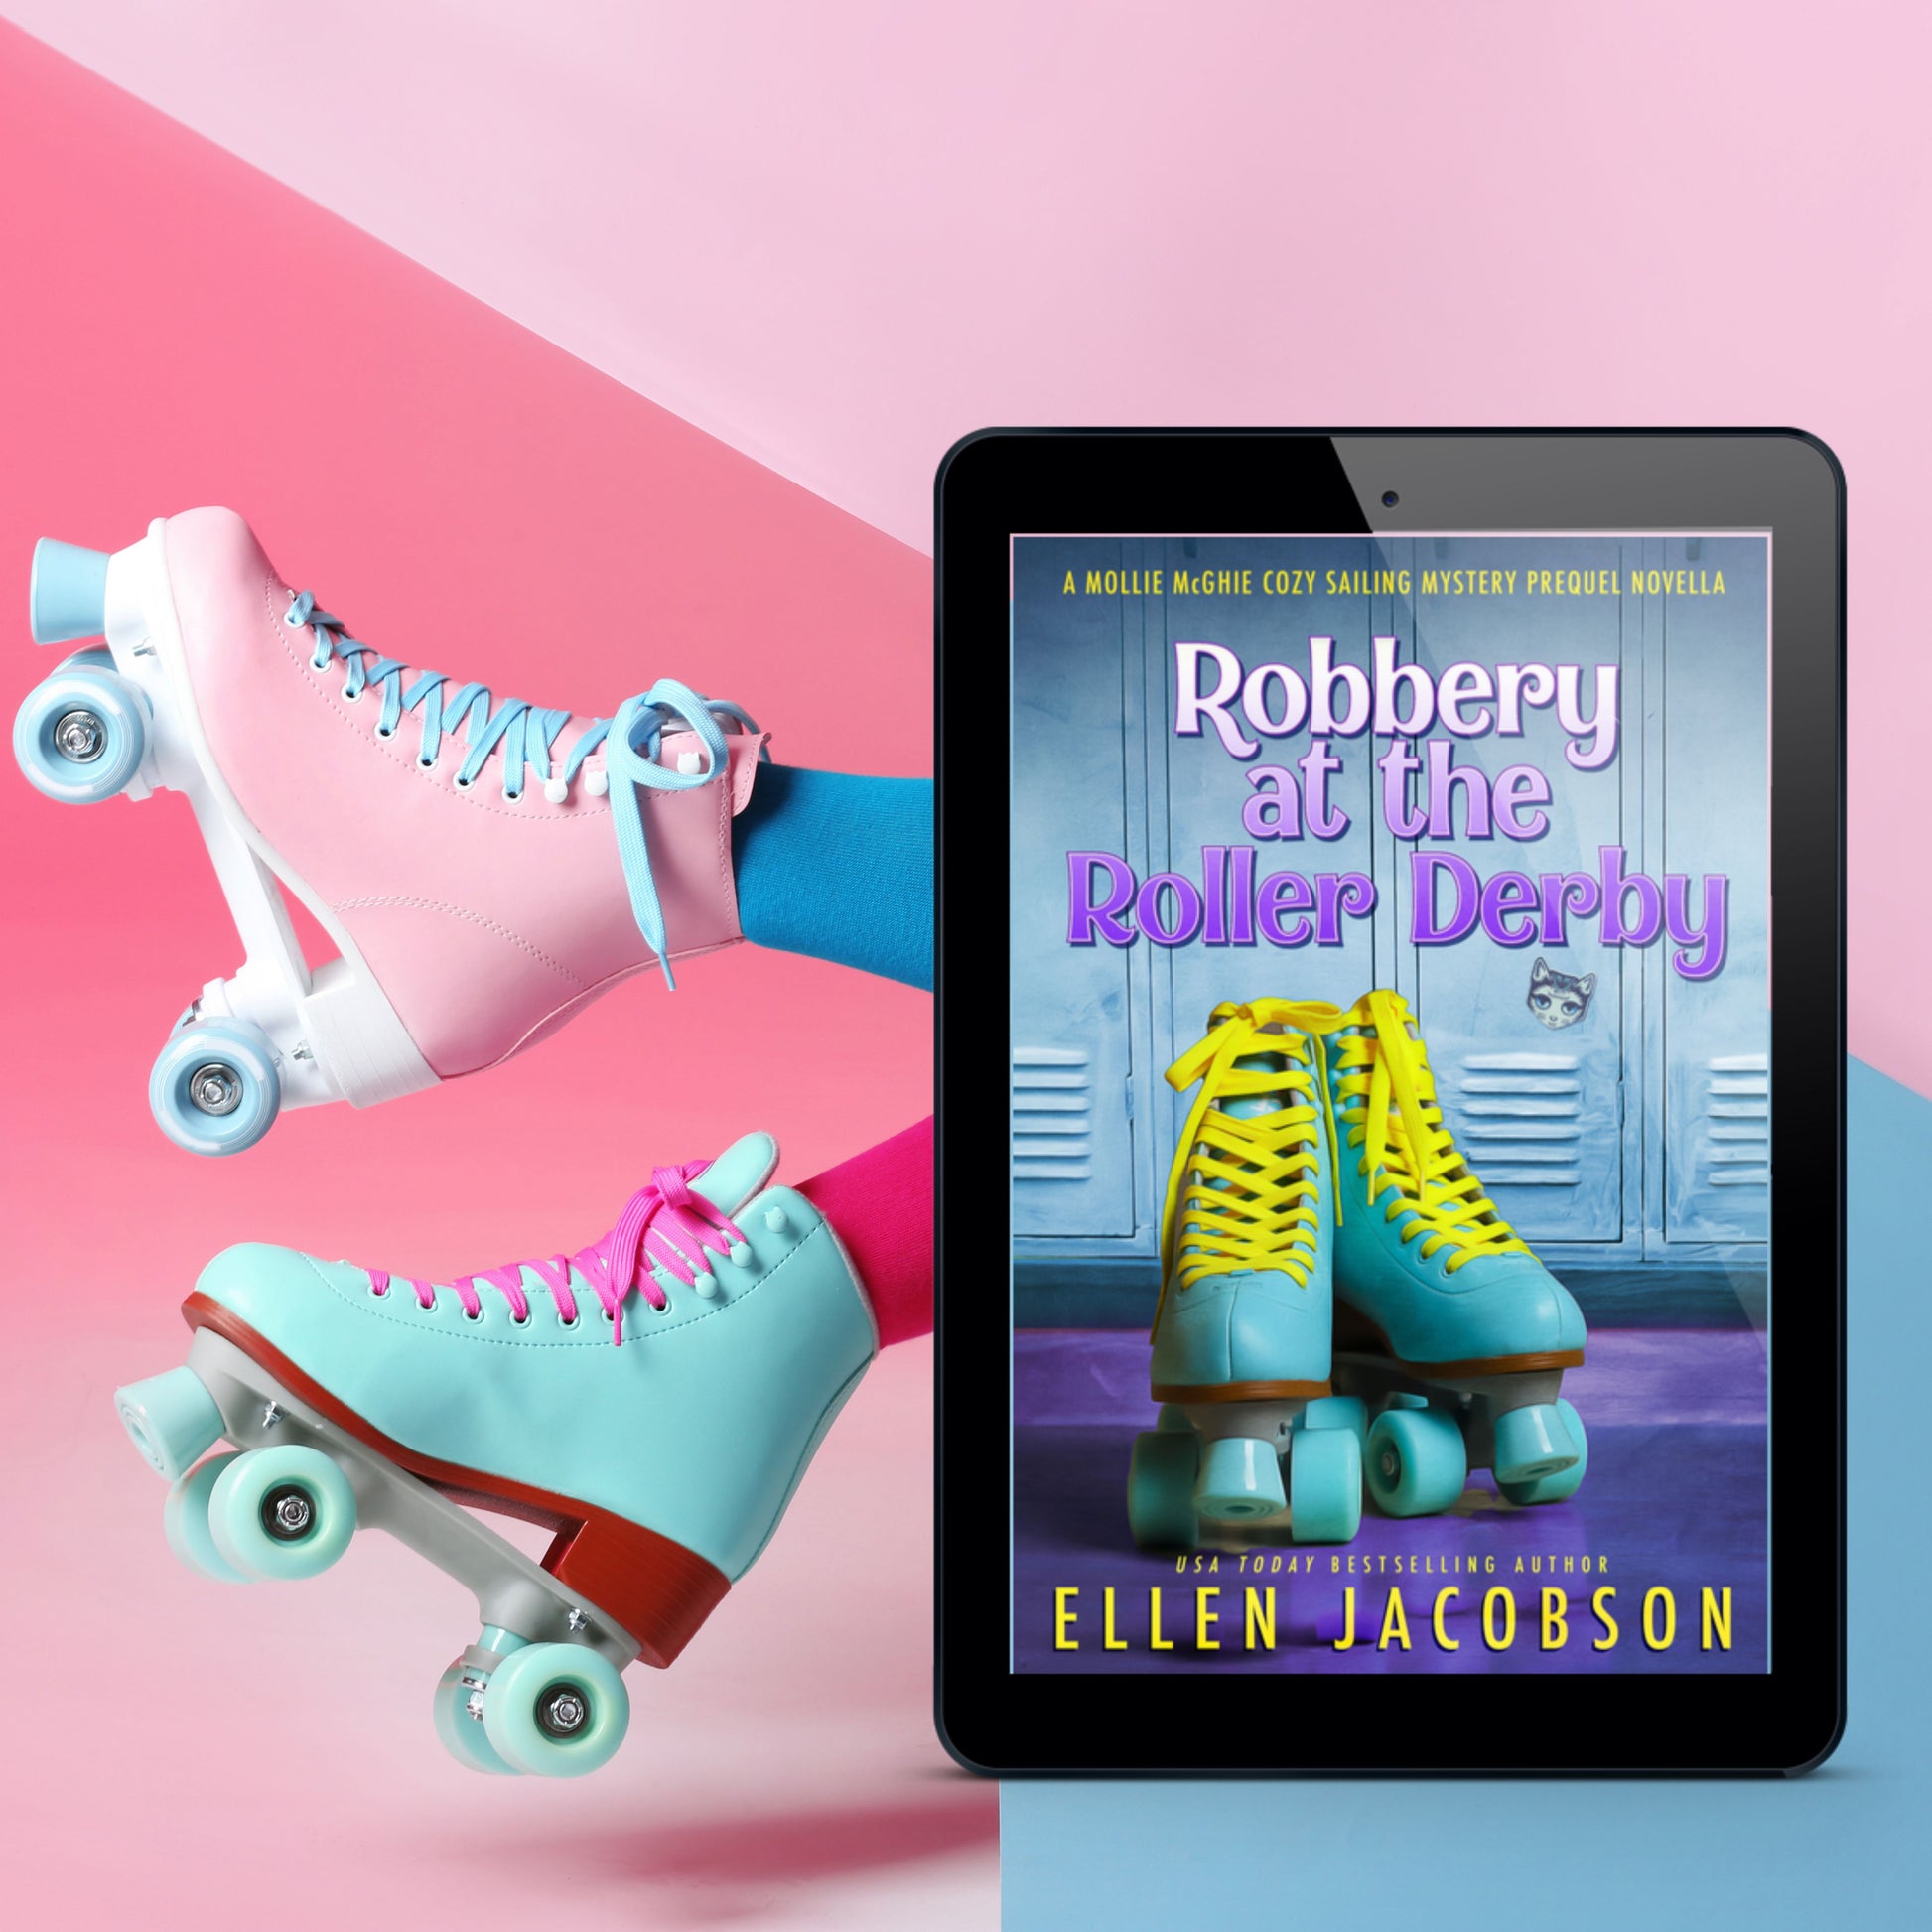 Robbery at the Roller Derby (Mollie McGhie Cozy Mystery Prequel) Ebook Cover with Image of Roller Skates